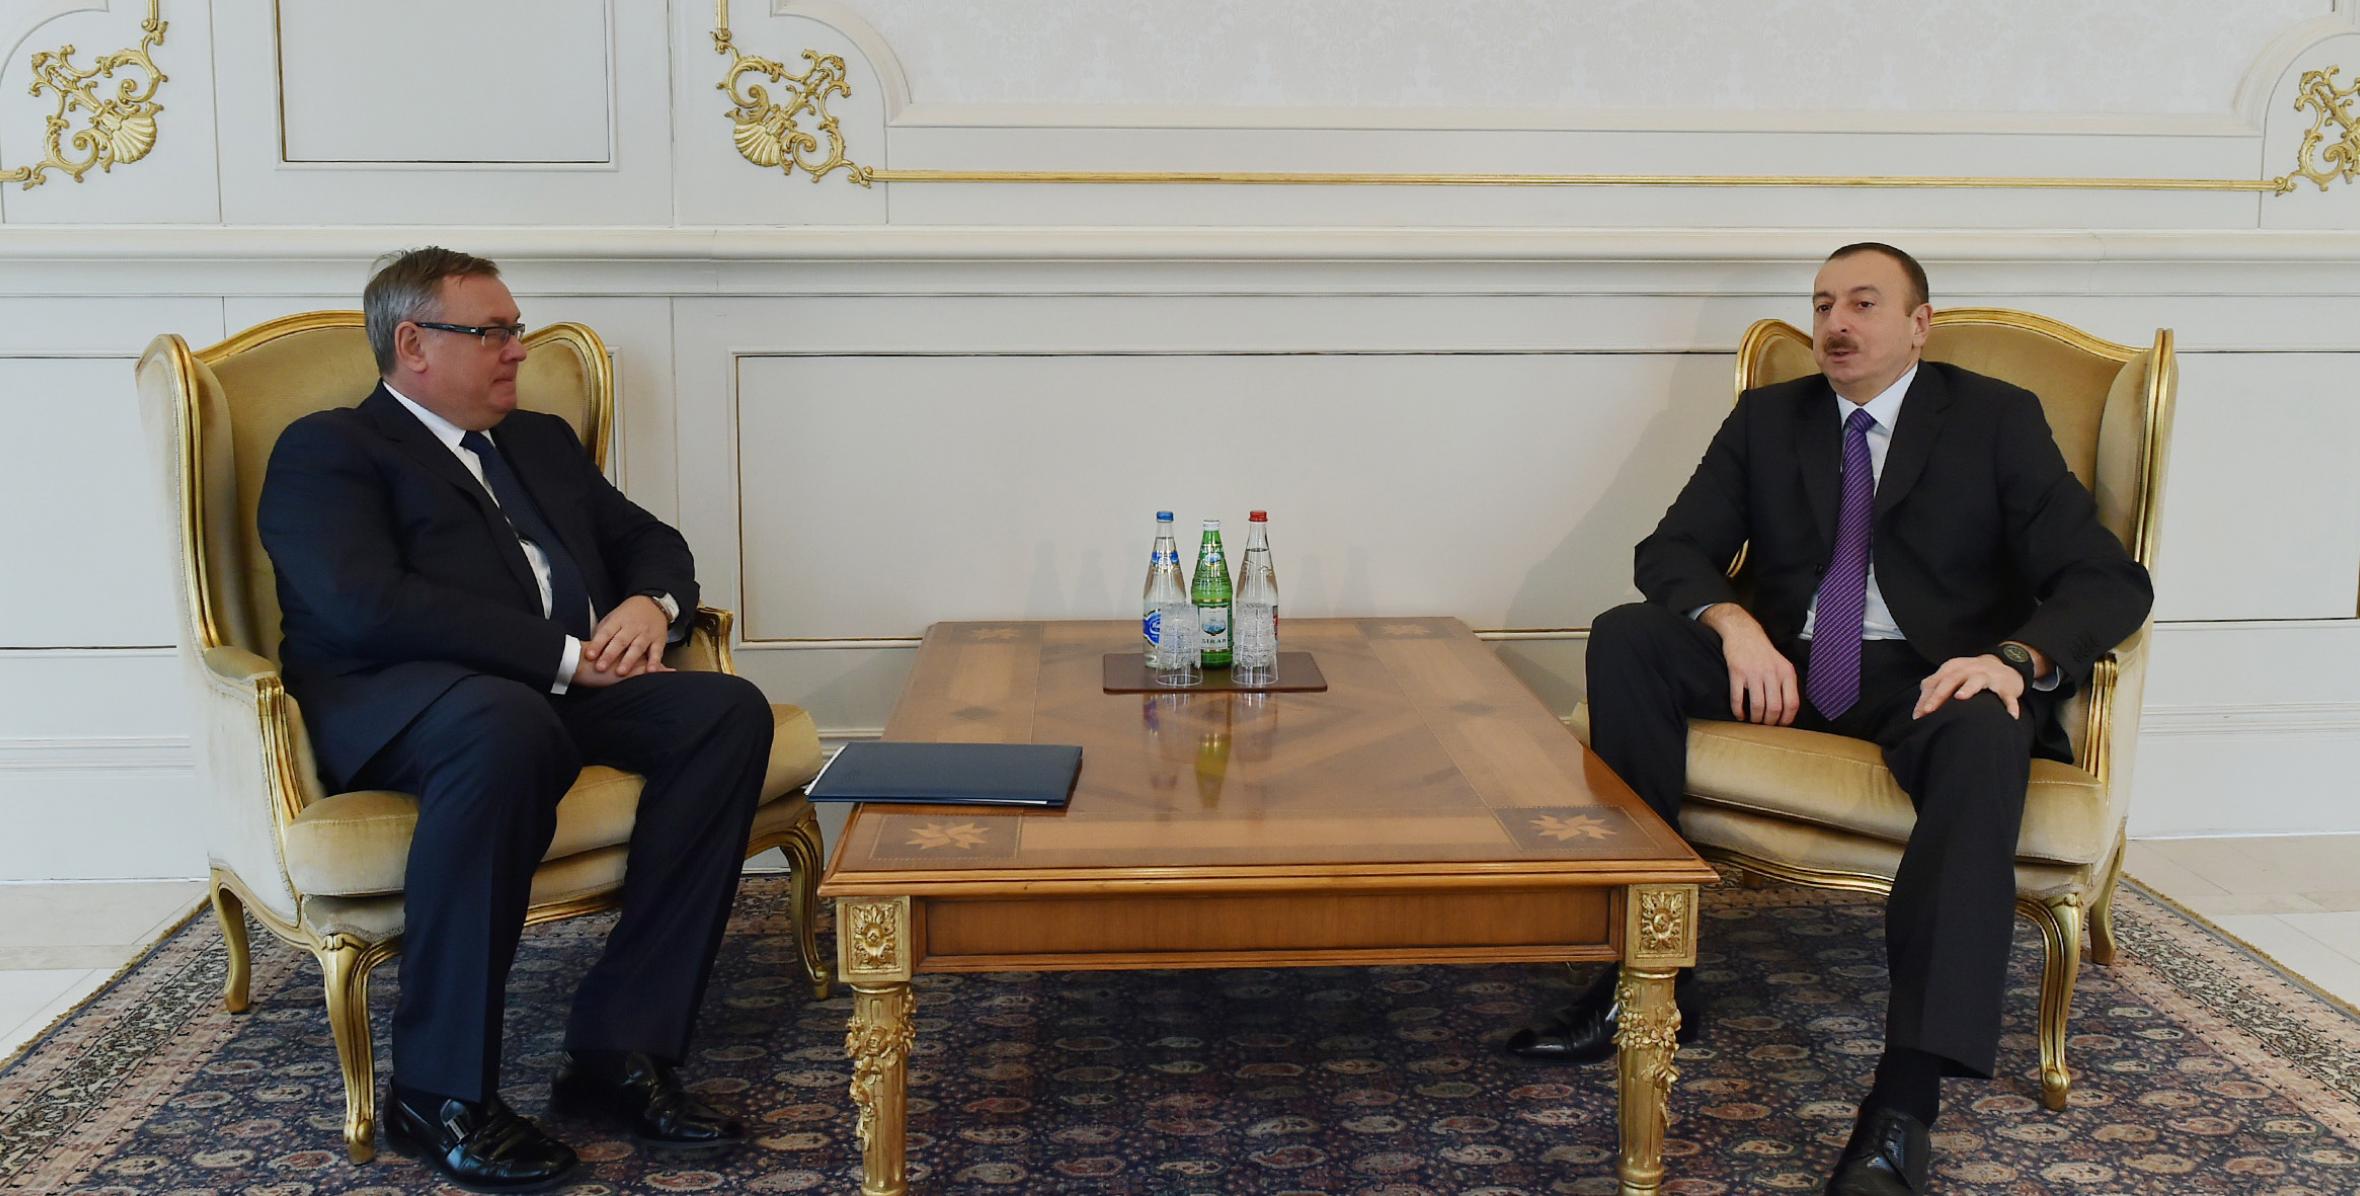 Ilham Aliyev received the President and Chairman of the Management Board of VTB Bank